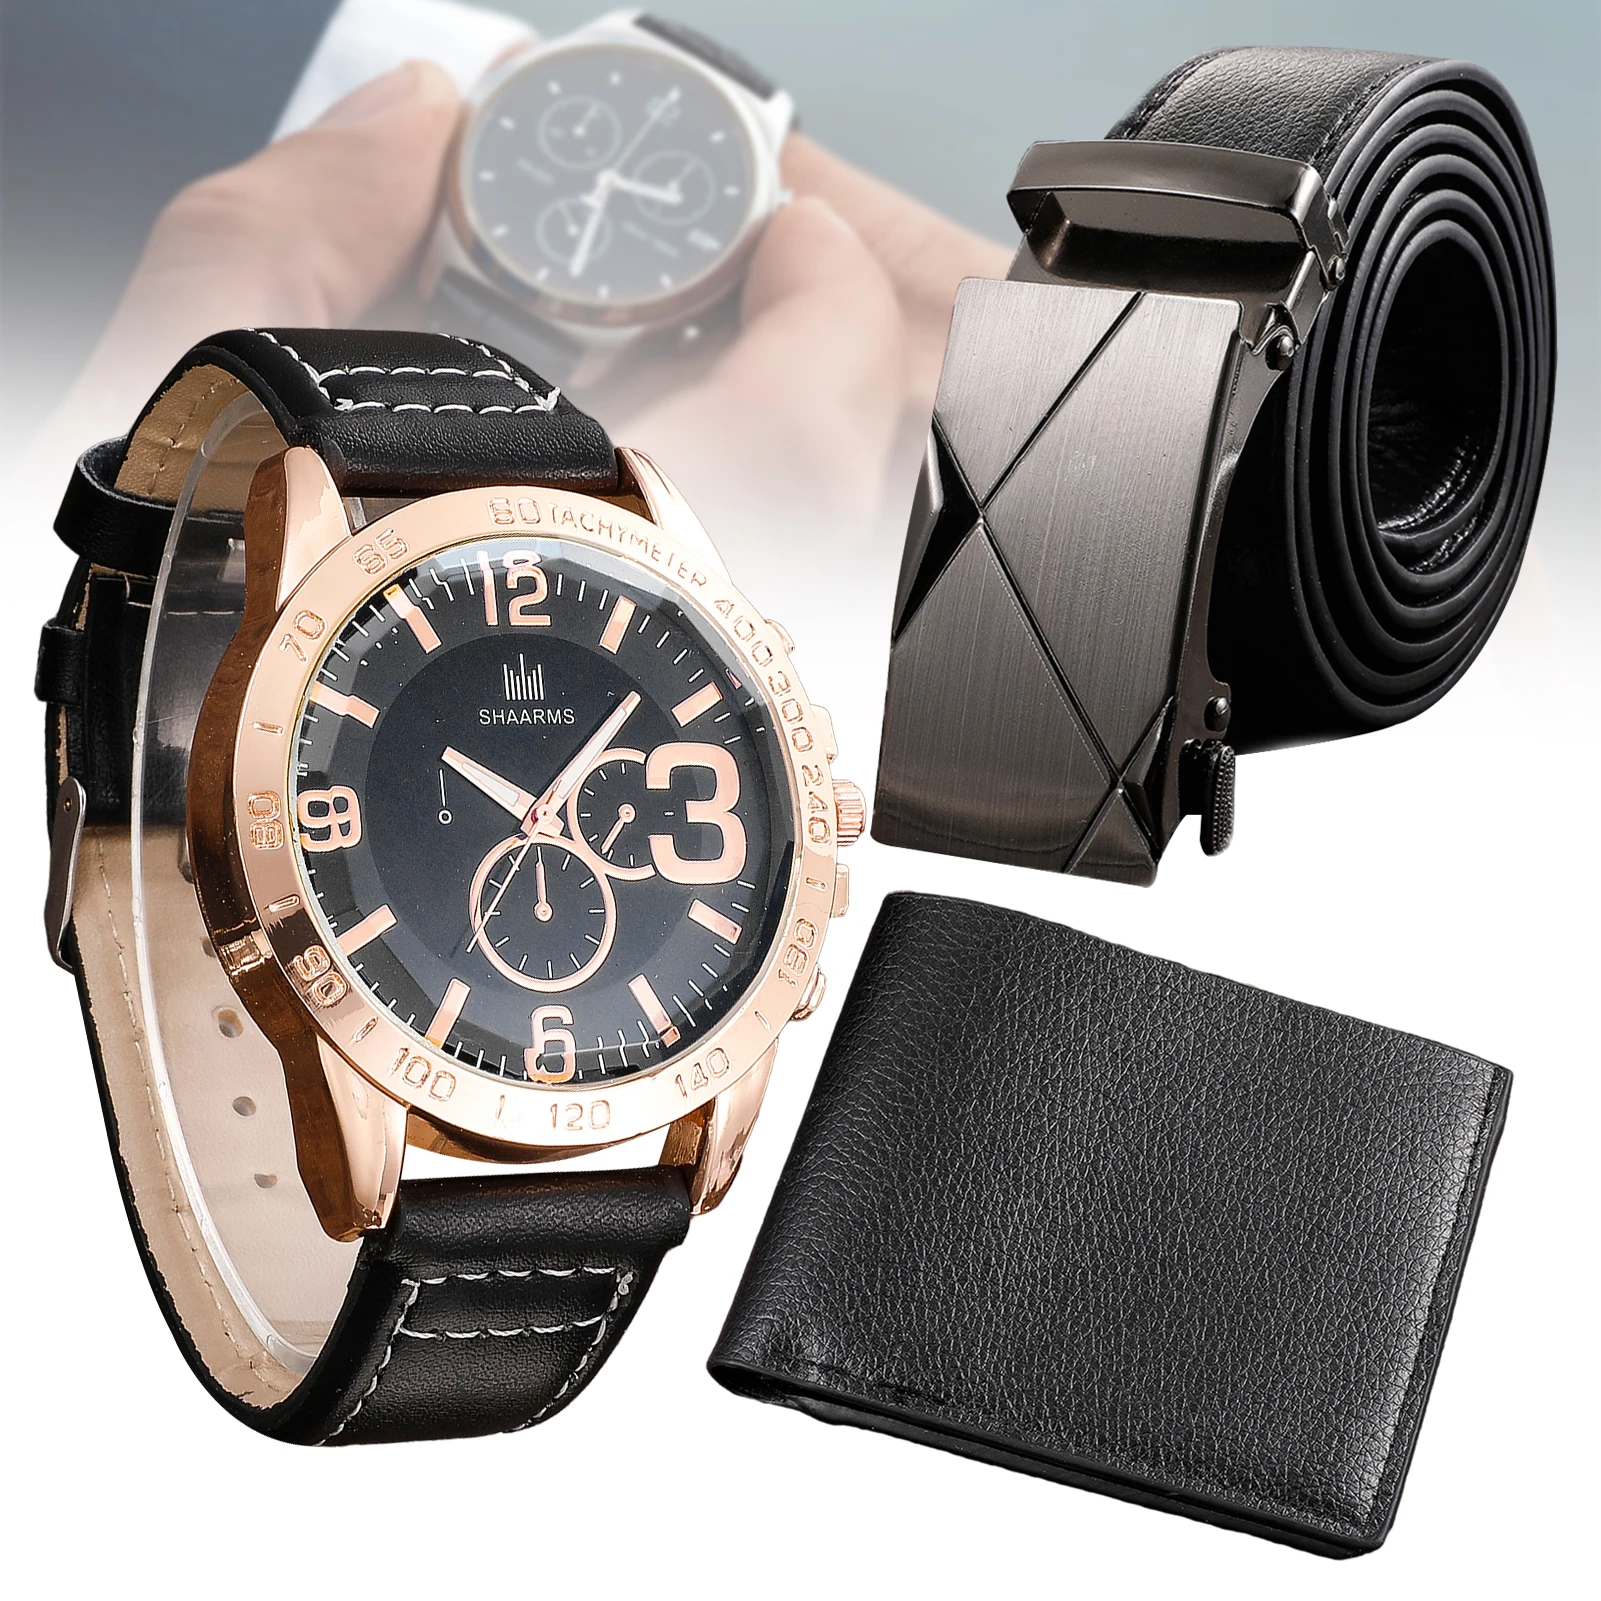 Men's Watch+Wallet+Belt Set Male's Gift for Father's Day Birthday Gift 3pcs/set for Dad Boyfriend Good-looking PU Strap EIG88